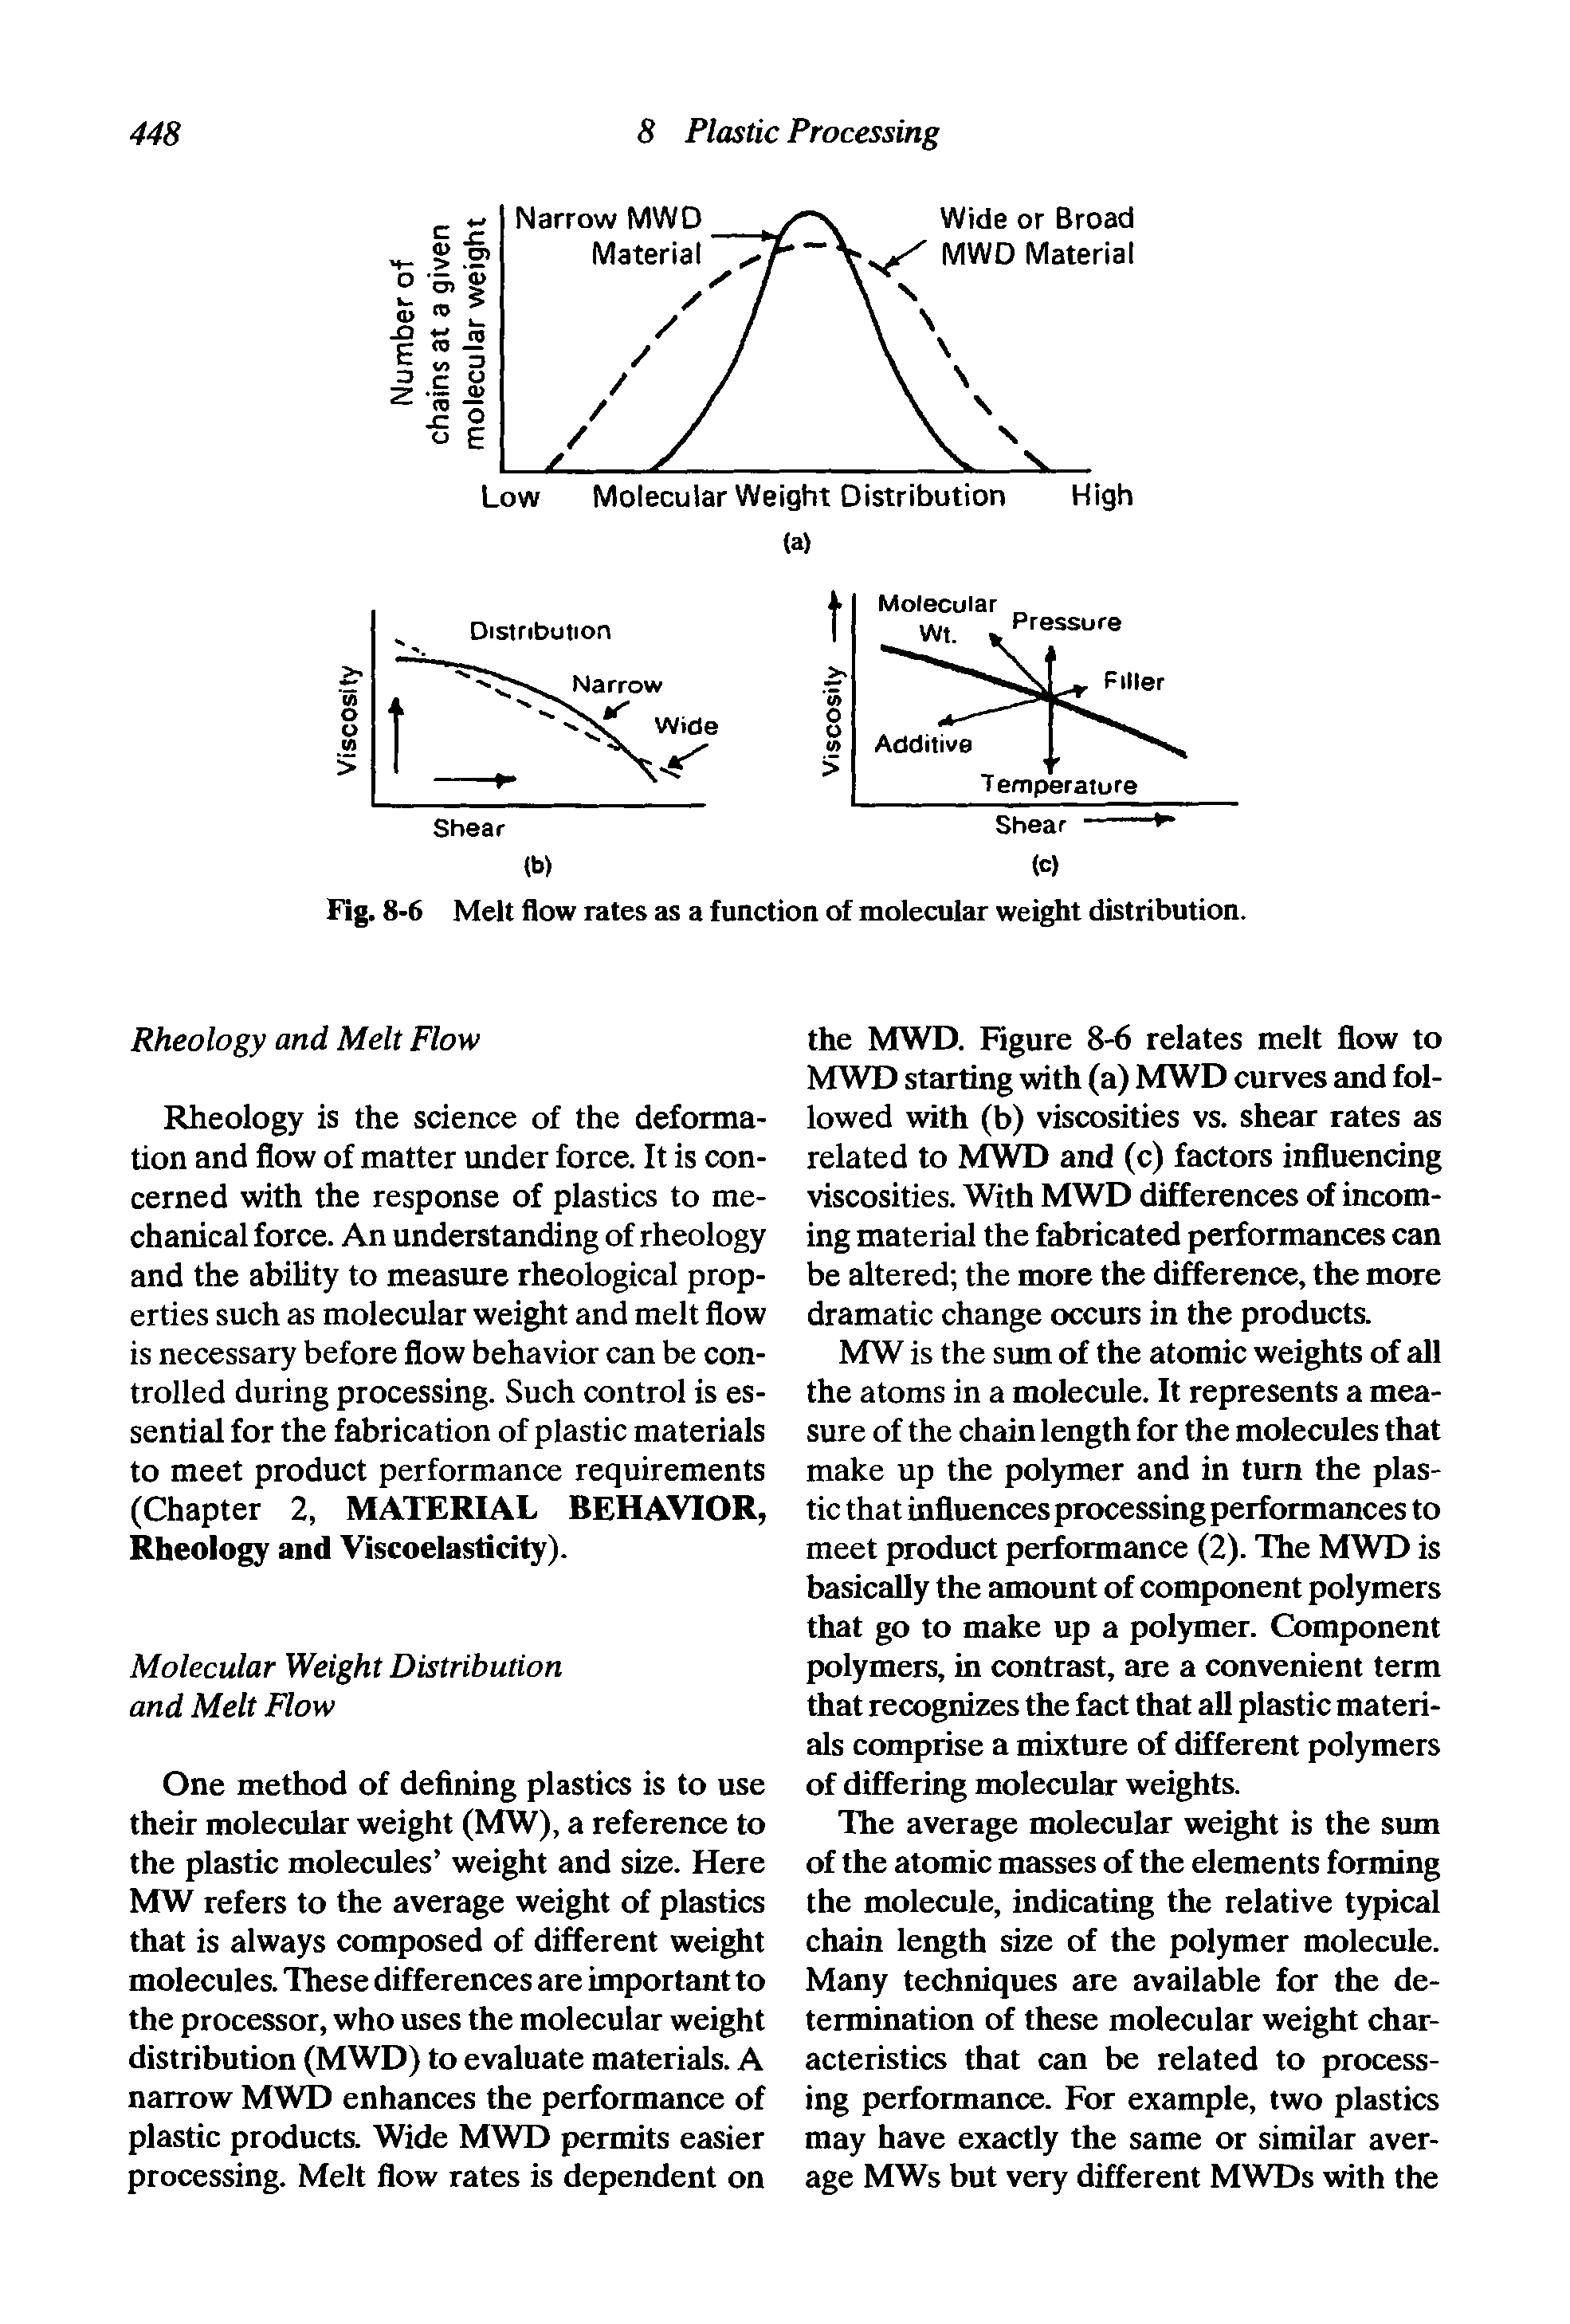 Fig. 8-6 Melt flow rates as a function of molecular weight distribution.